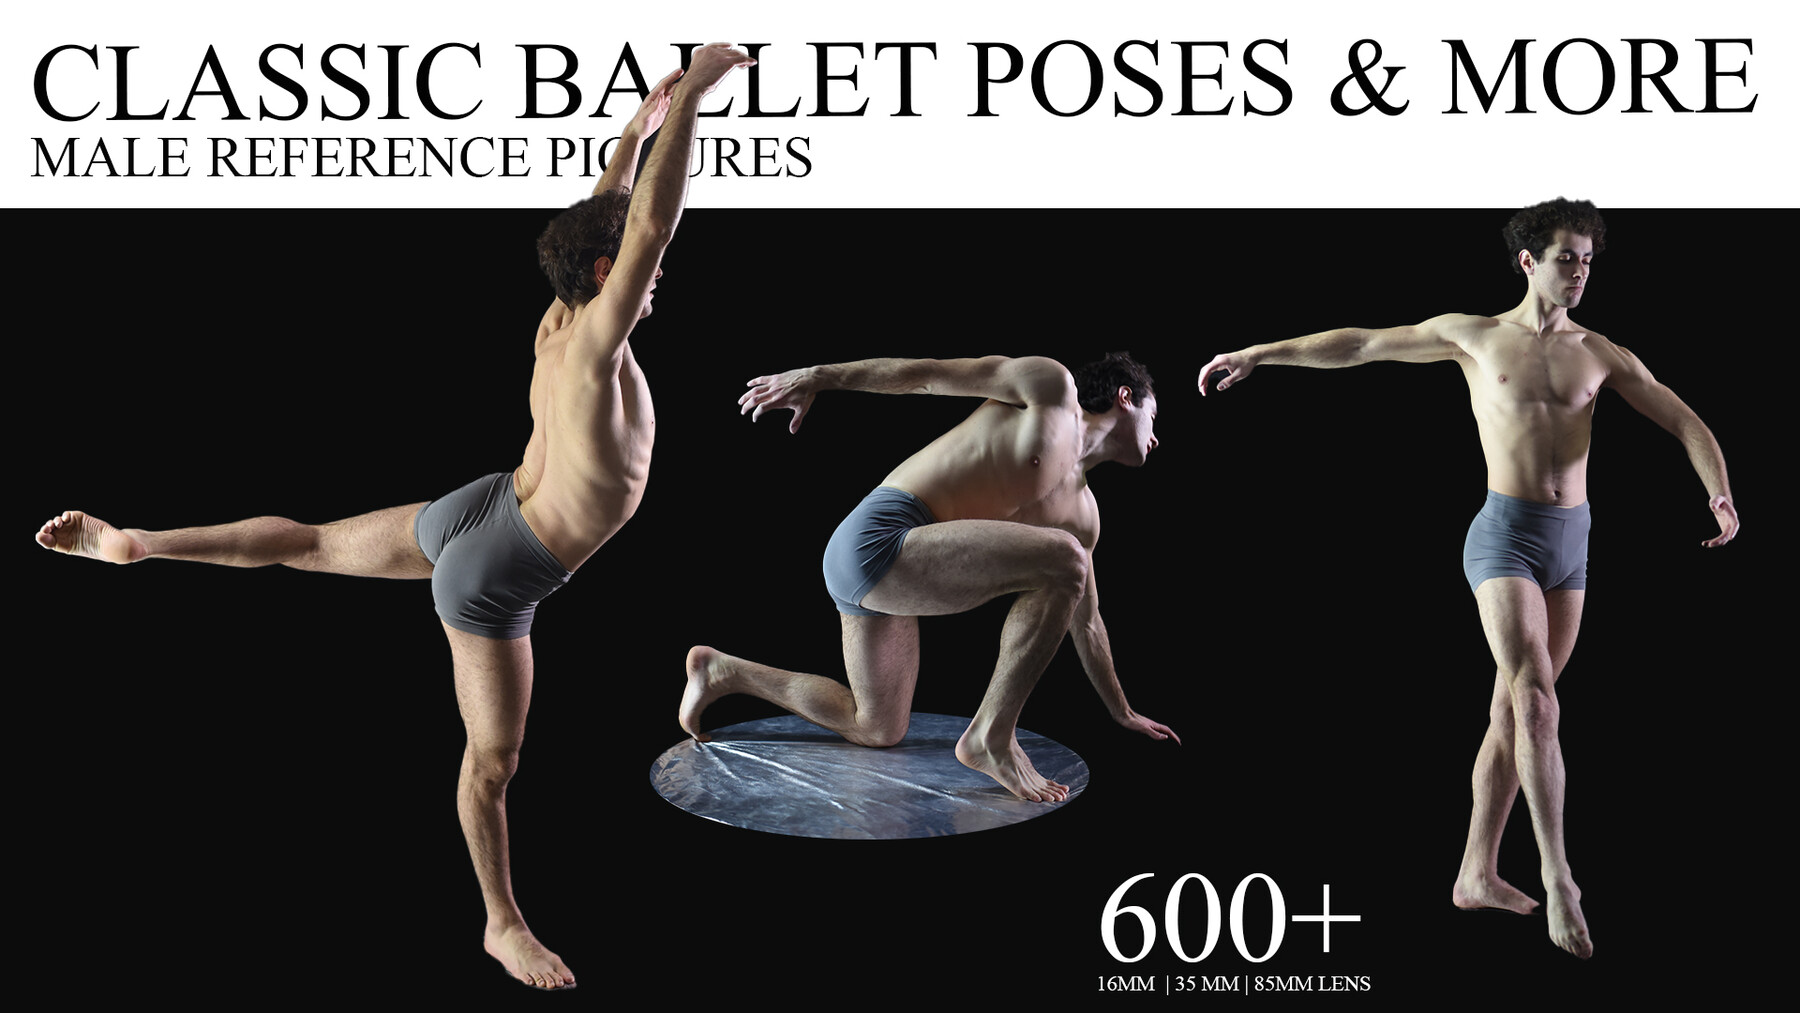 Roberto Bolle | Ballet poses, Male ballet dancers, Human poses